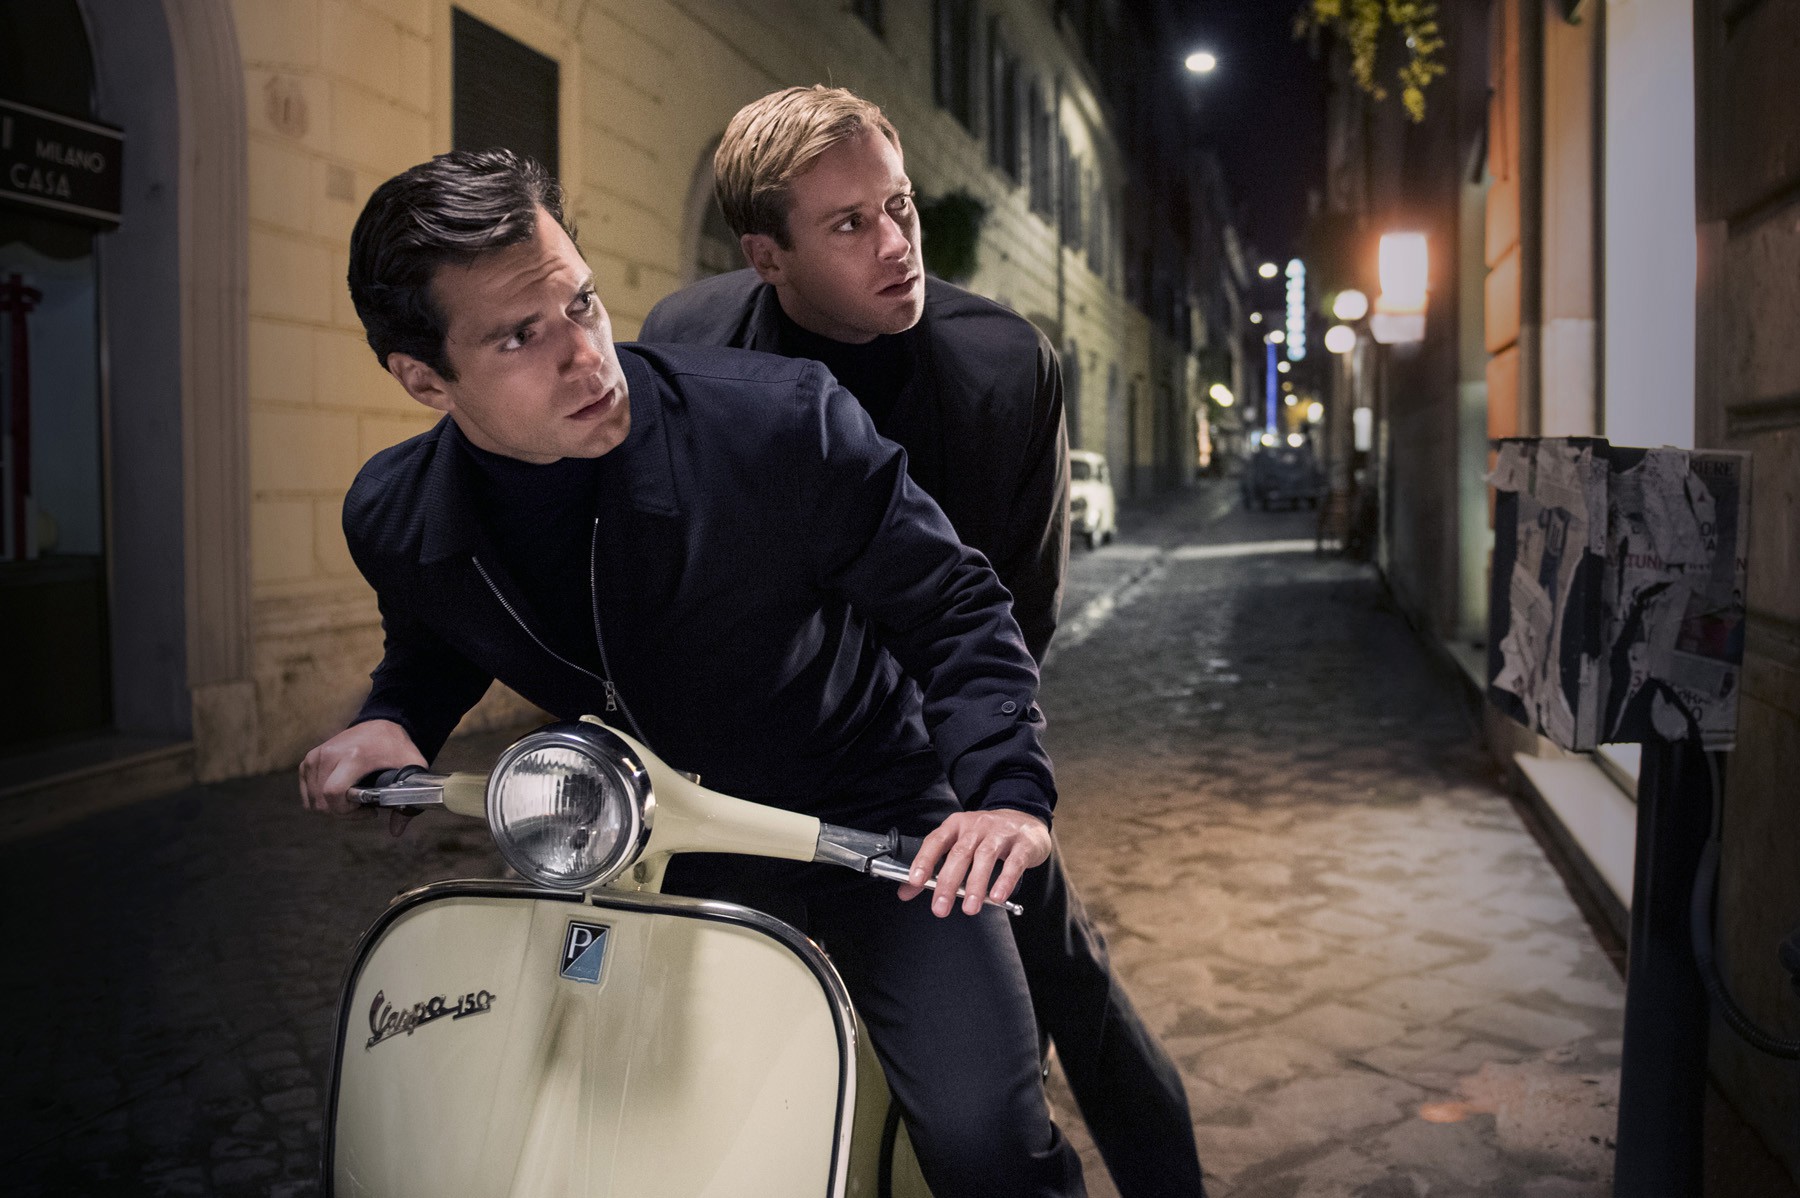 HD Quality Wallpaper | Collection: Movie, 1800x1198 The Man From U.N.C.L.E.